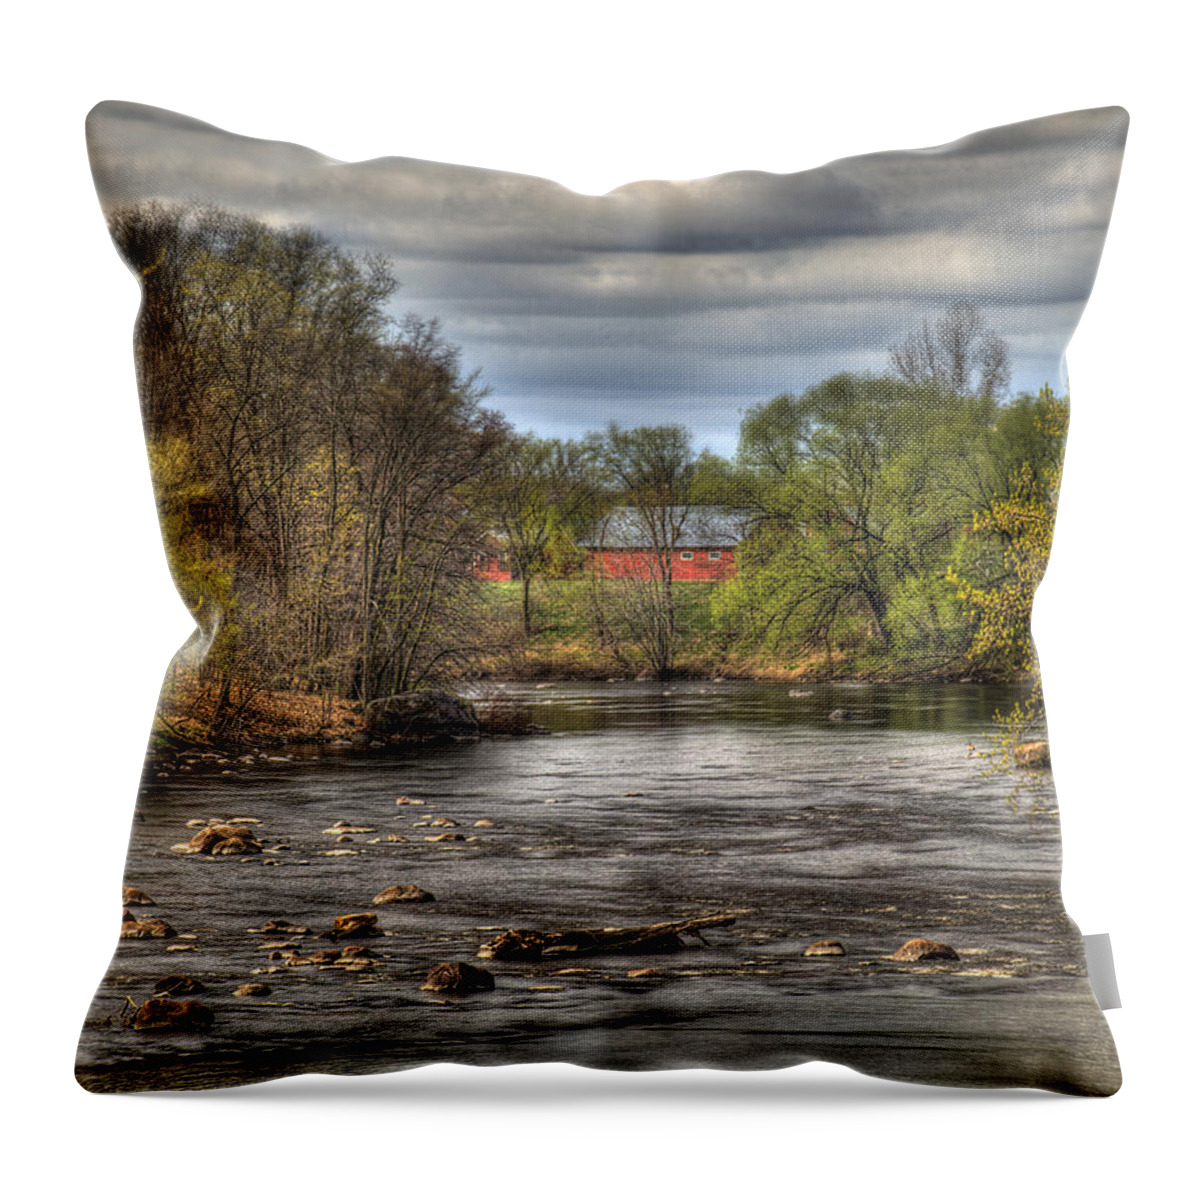 River Throw Pillow featuring the photograph Scenic River 2 by Thomas Young